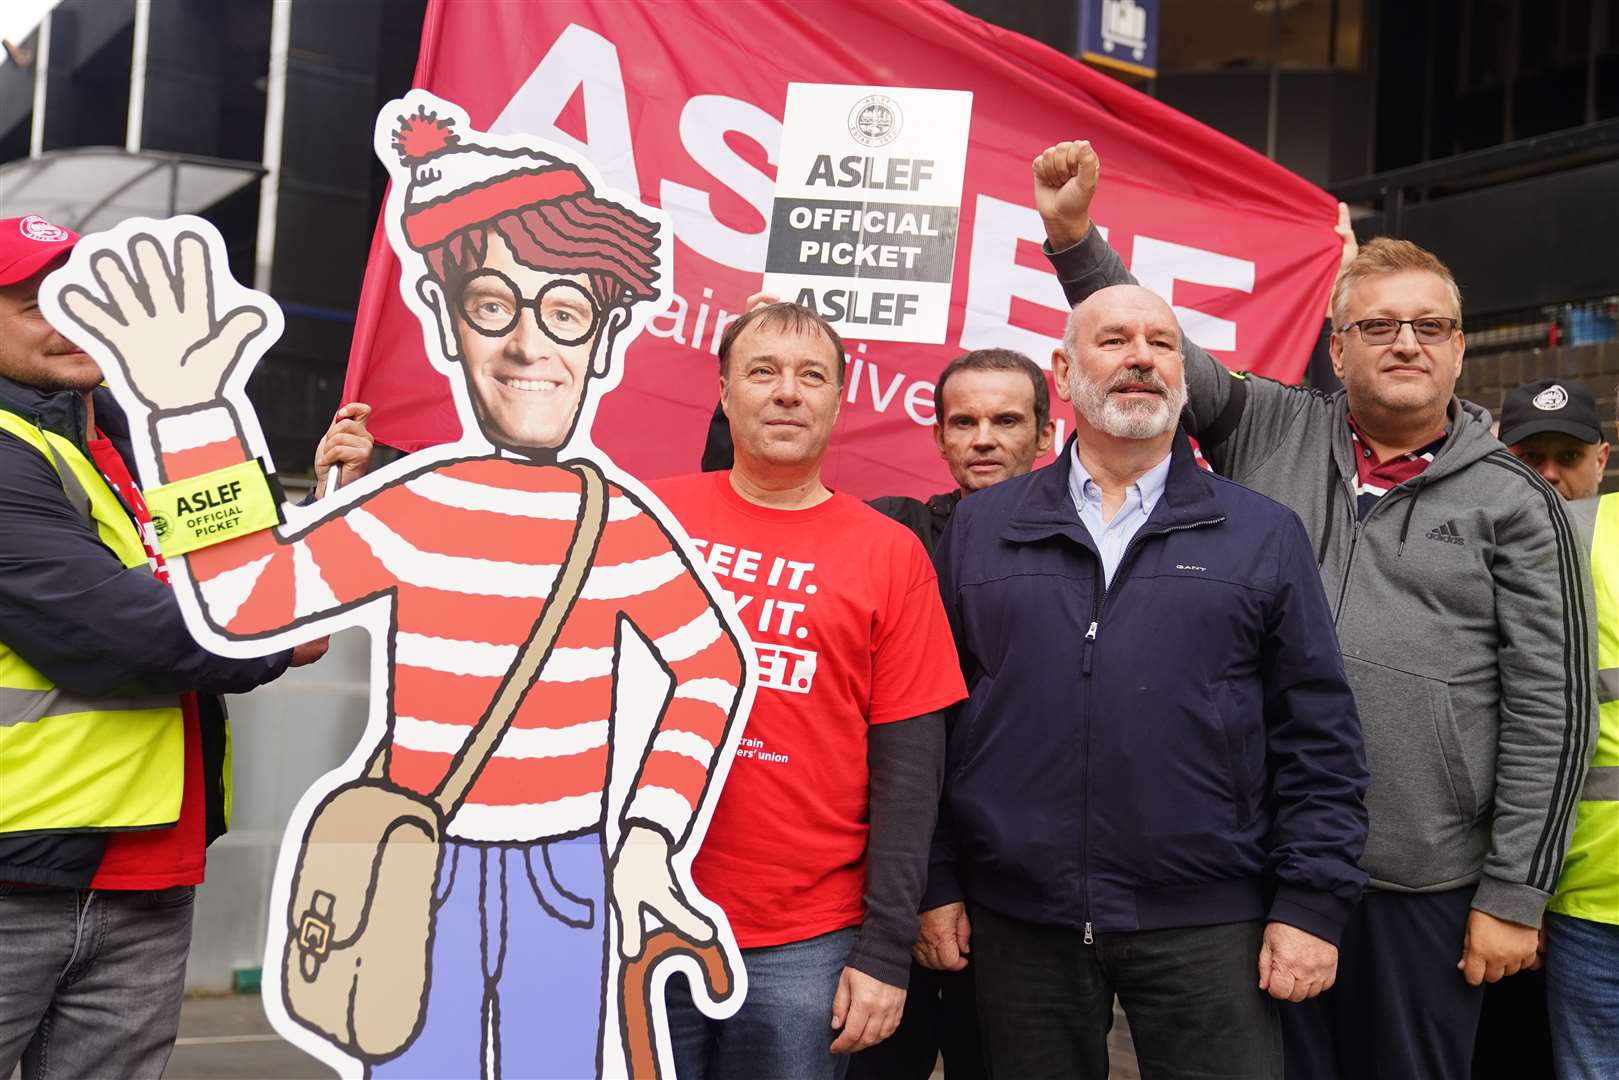 Aslef general secretary Mick Whelan (second right) on a picket line at Euston station in London (James Manning/PA)